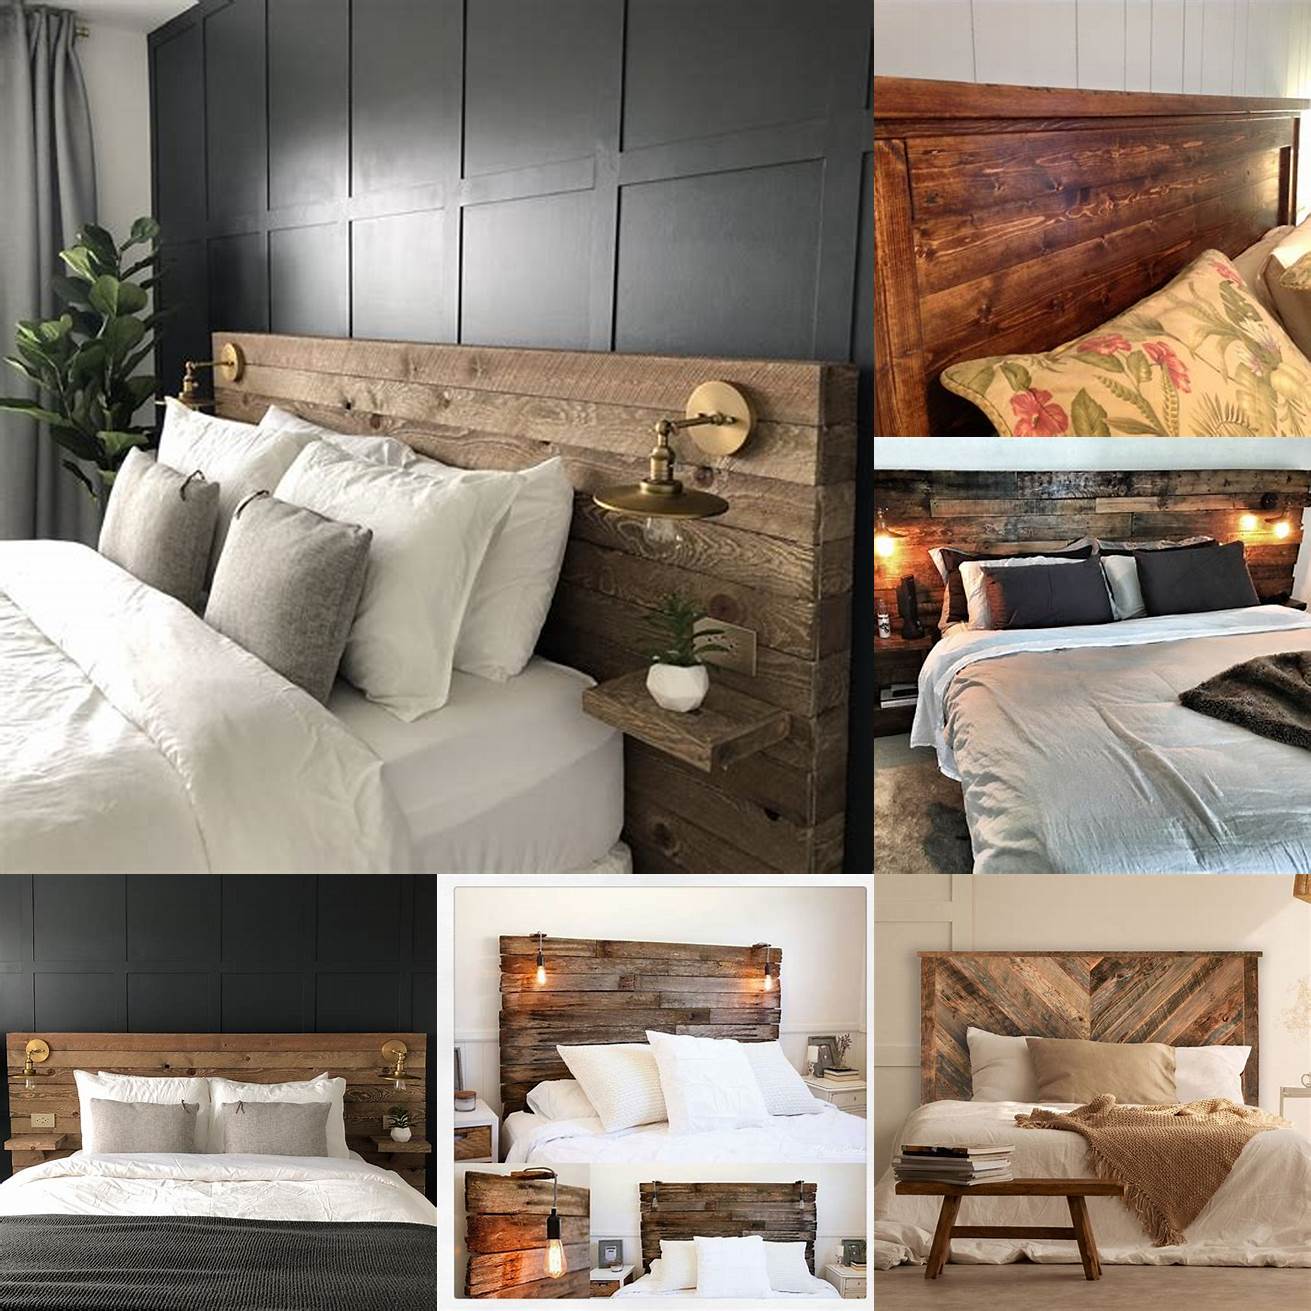 Image of a reclaimed wood bed frame with a statement headboard